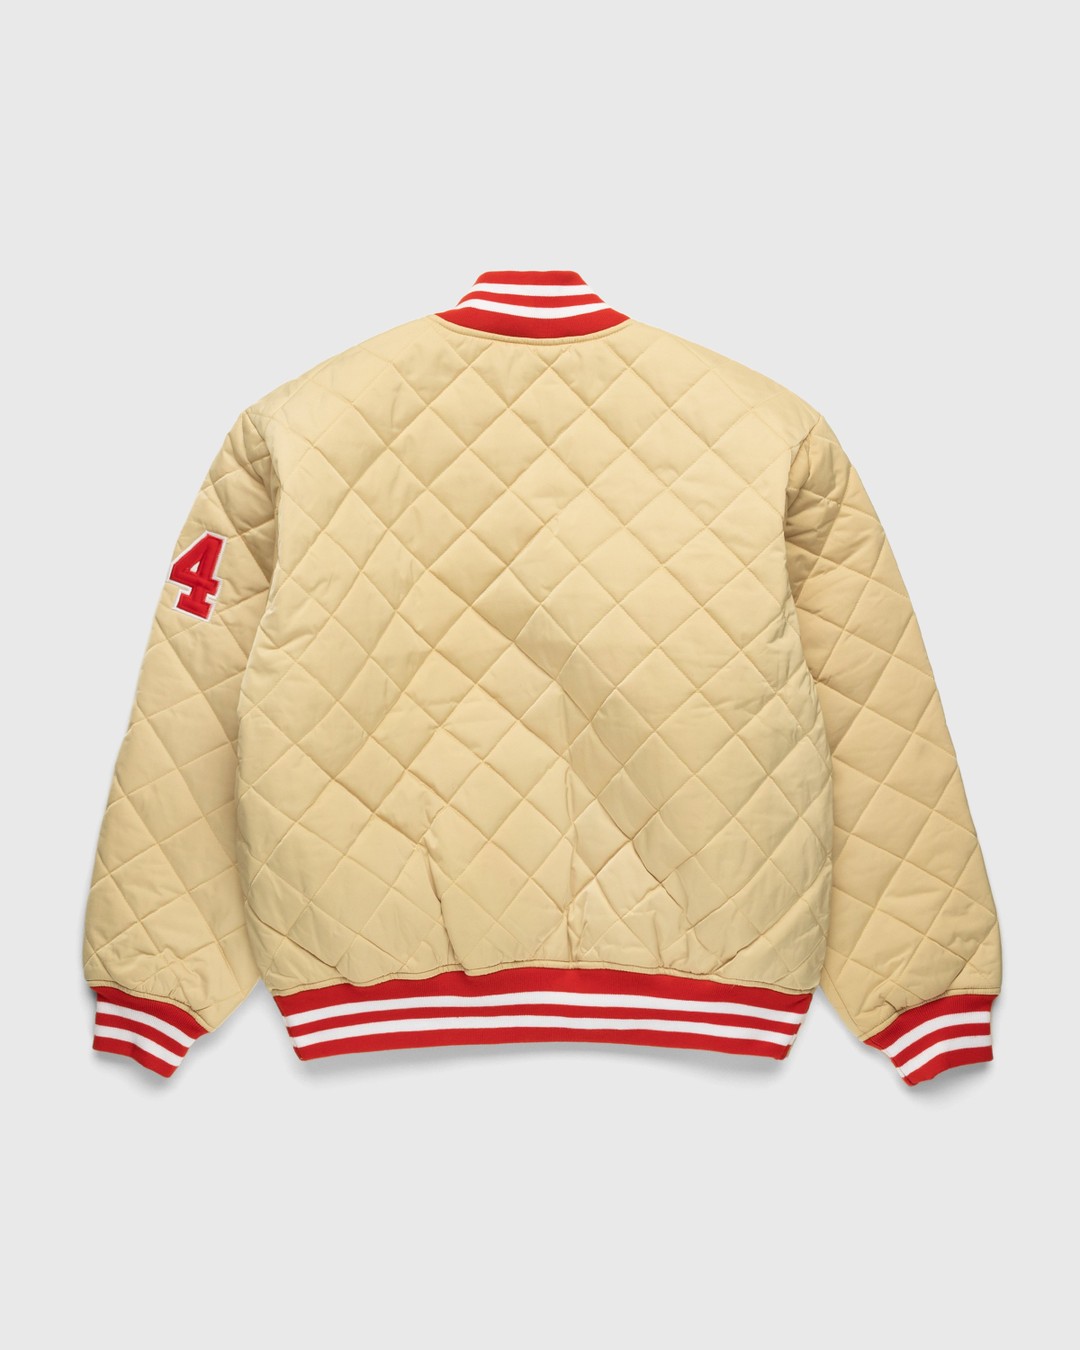 Patta – Diamond Quilted Sports Jacket Mojave Desert - Bomber Jackets - Brown - Image 2